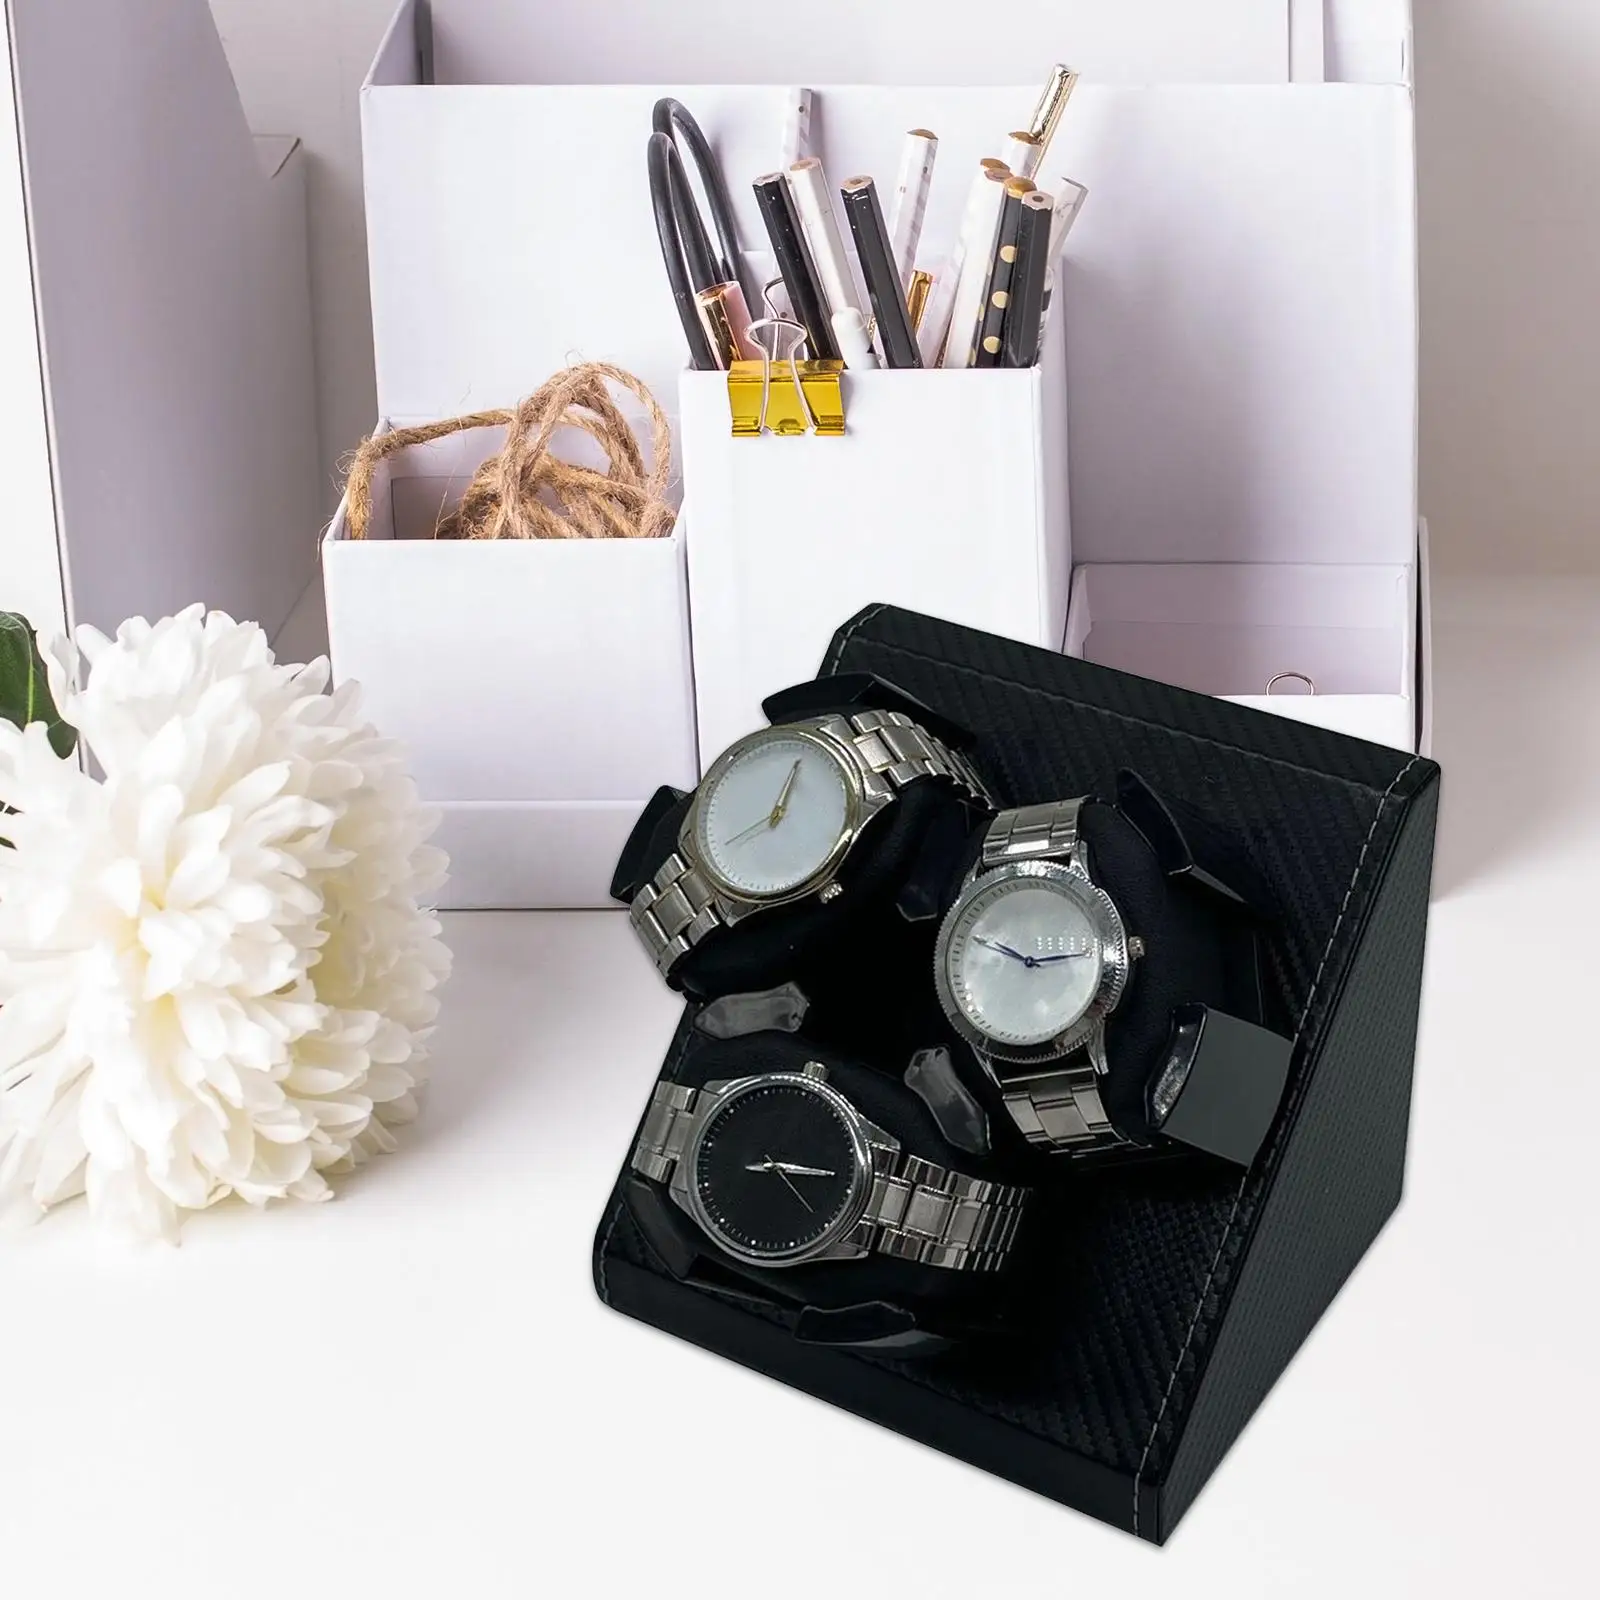 Automatic Watch Winder 2 Rotation Mode Jewelry Storage with Quiet Motor Watch Winder Box for Wristwatch Gifts Desktop Bedroom